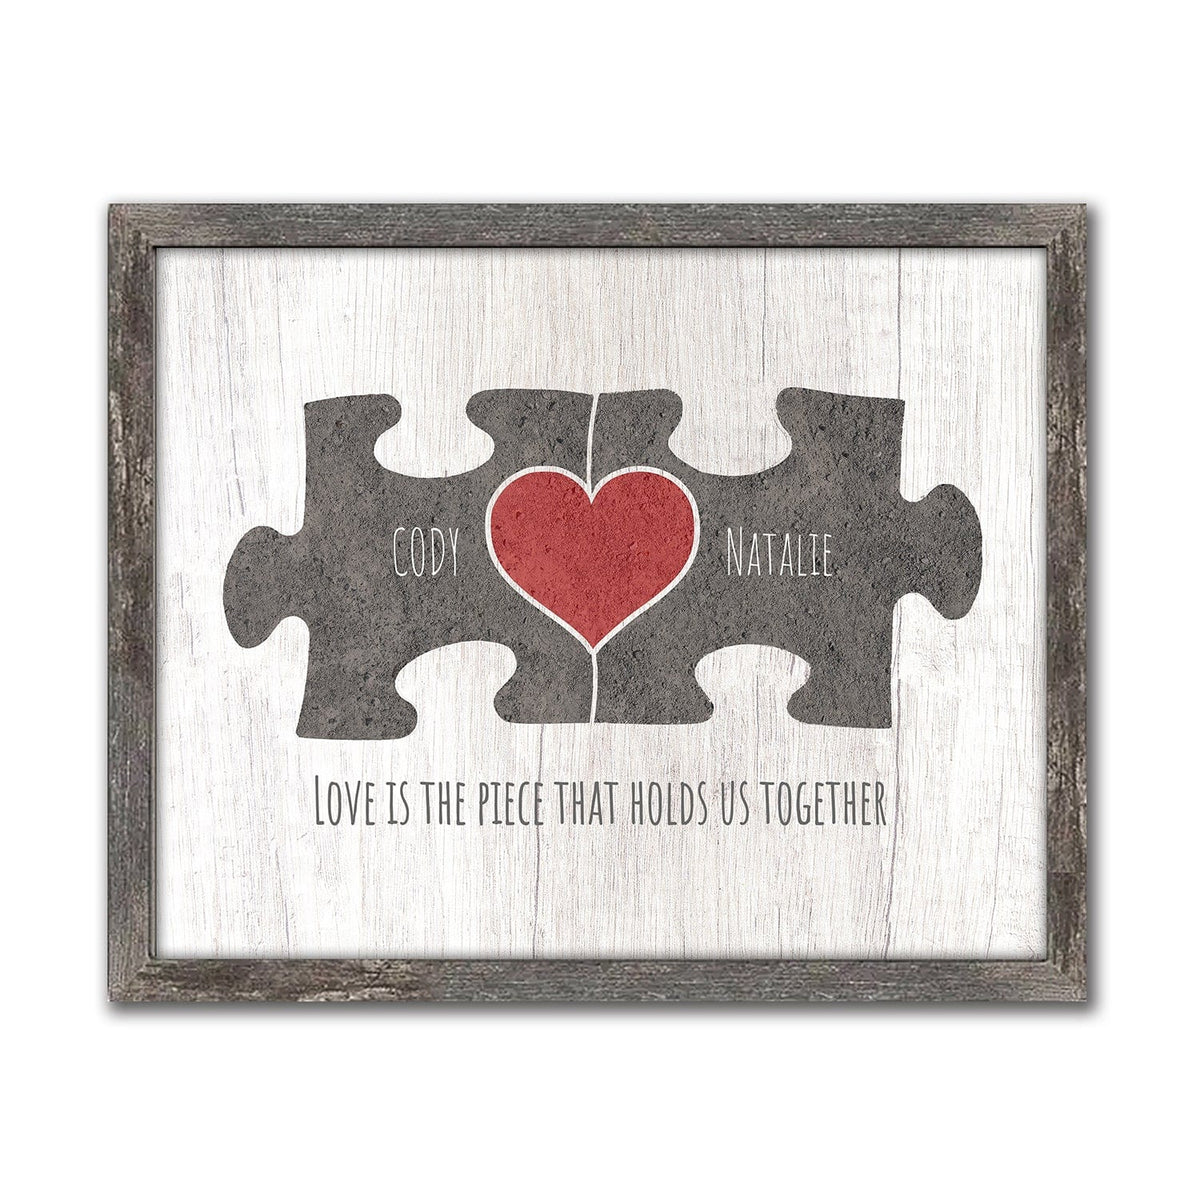 Romantic personalized gift - names in art on puzzle pieces with a heart